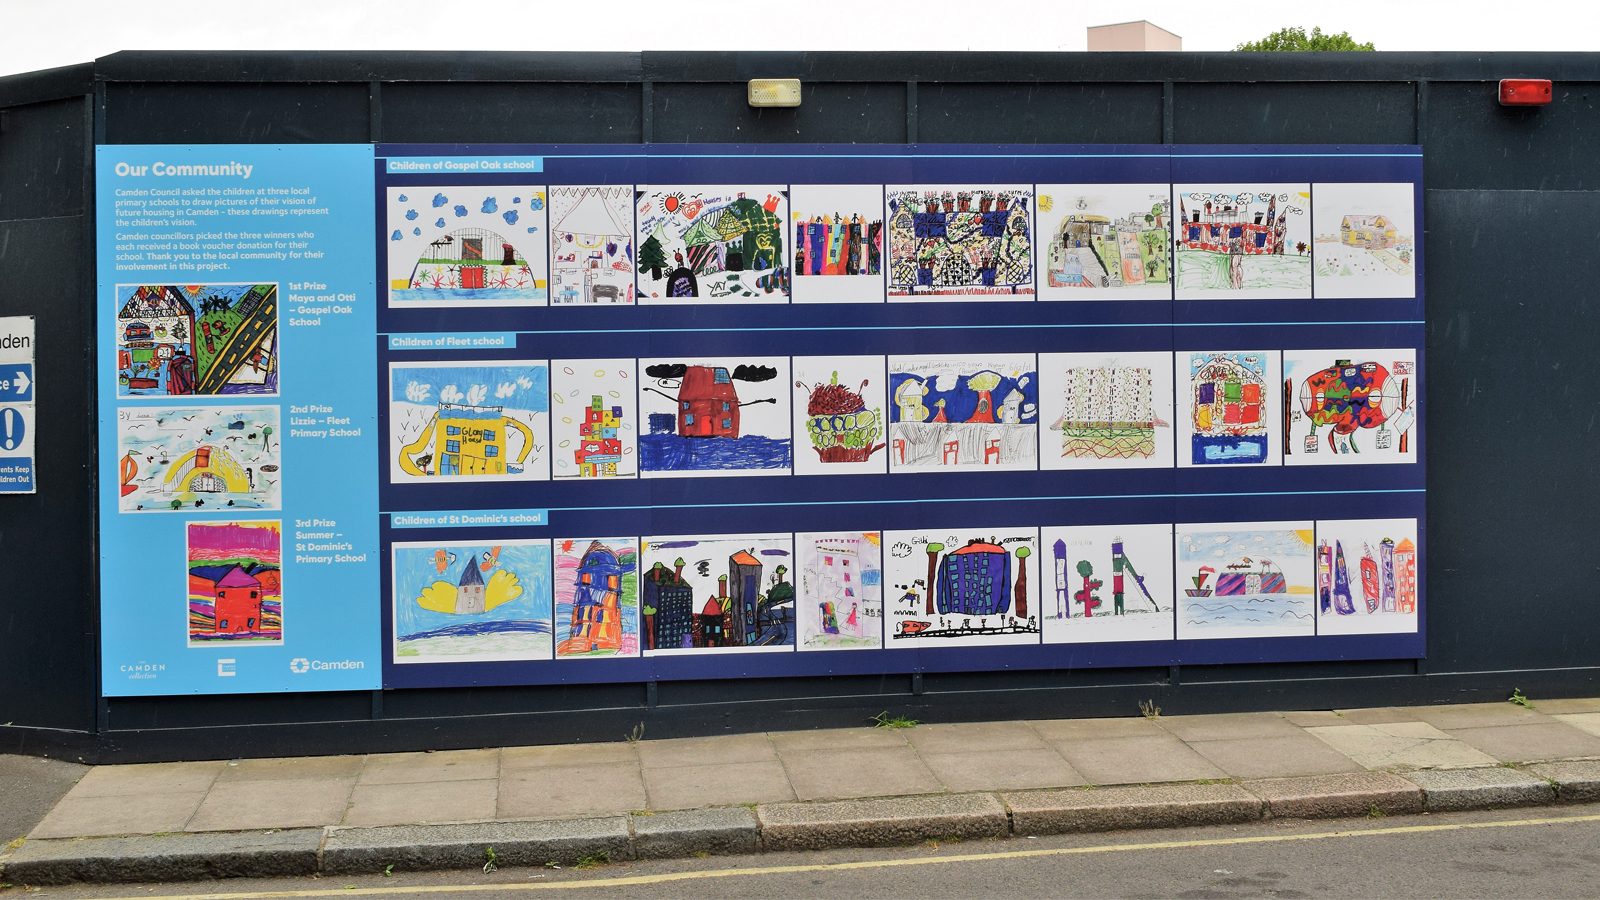 Drawings by Camden school children that illustrate their visions of the future of housing in the borough, which are being displayed on the hoarding of a building site